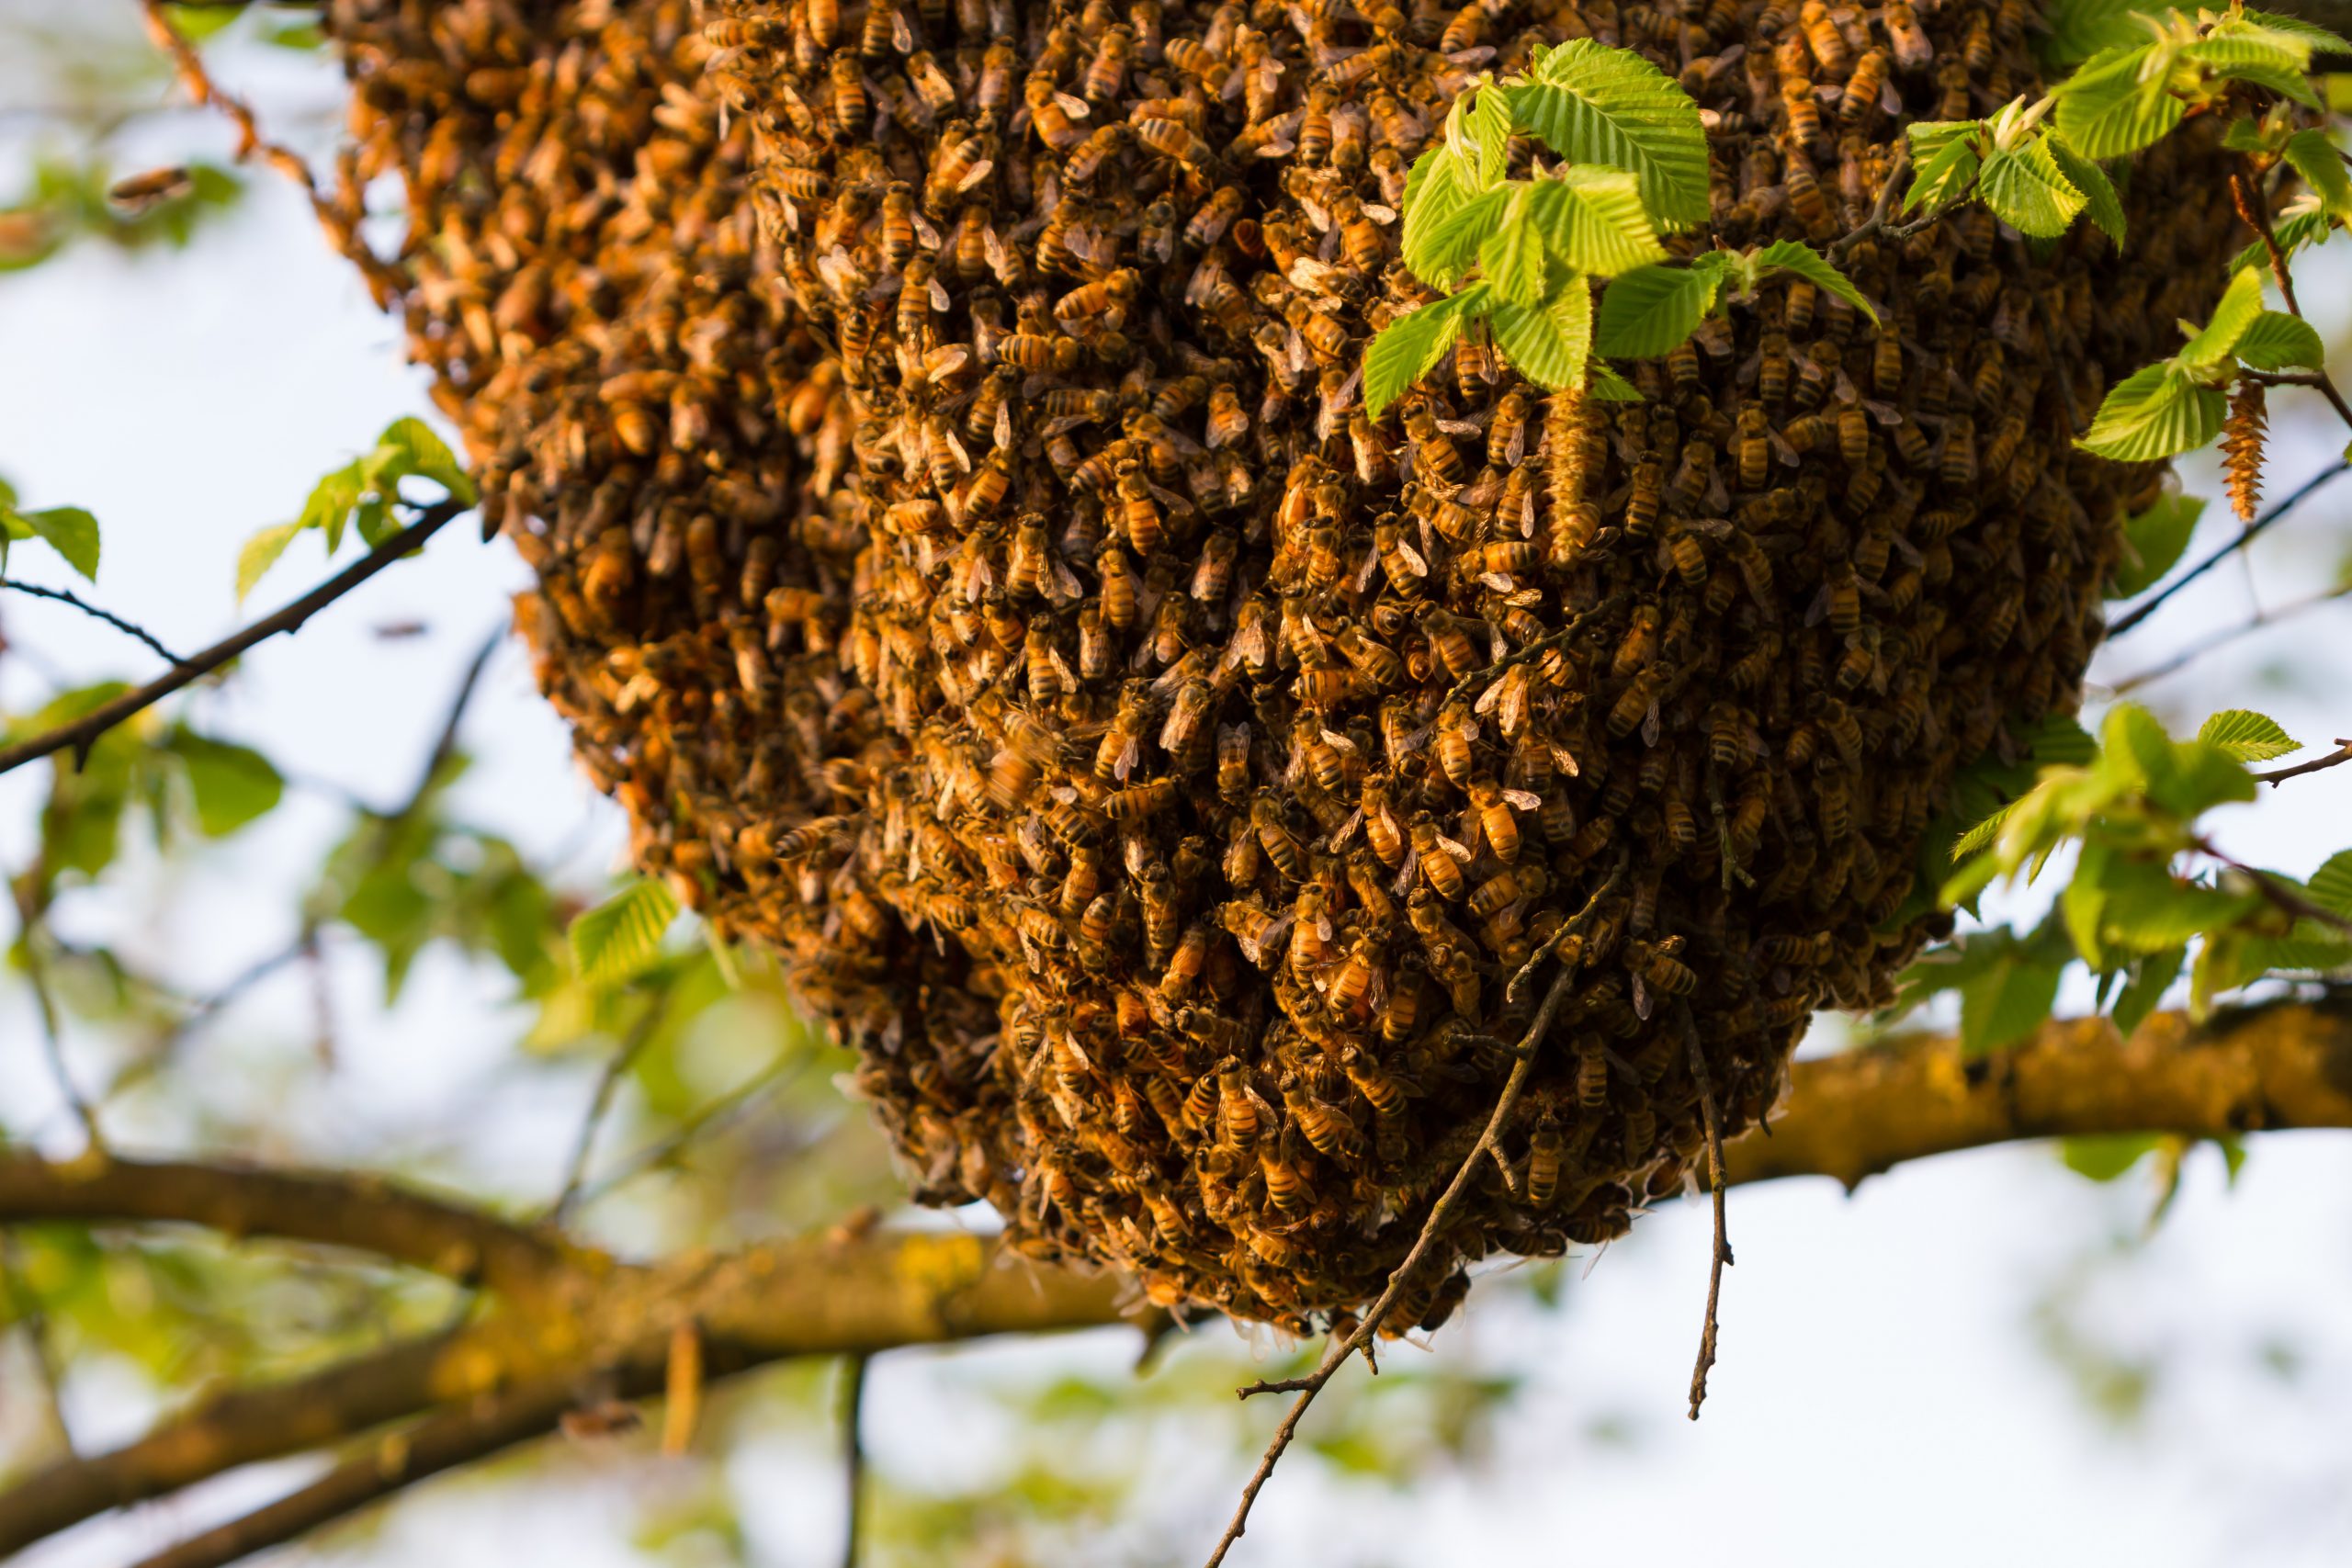 Do African Honeybees Hold the Secret to the Colony Collapse Disorder?